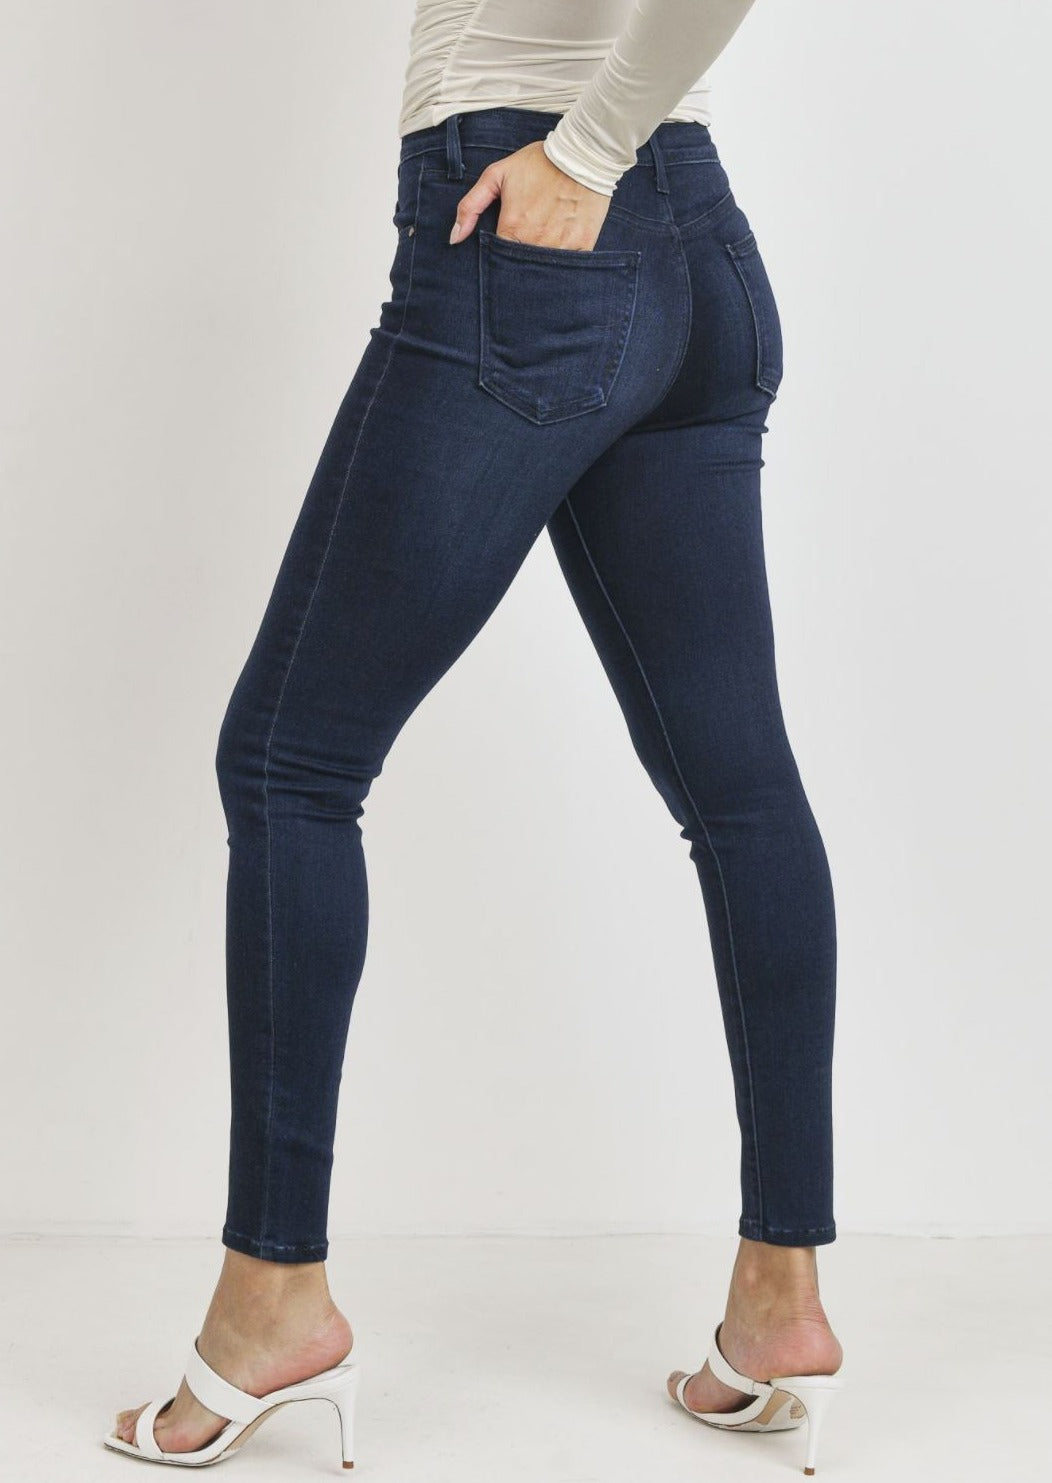 BP258J Just Black Denim  | Luxury Soft 5 Pocket Classic Skinny | Made in the USA | Classy Cozy Cool Women's Clothing Boutique